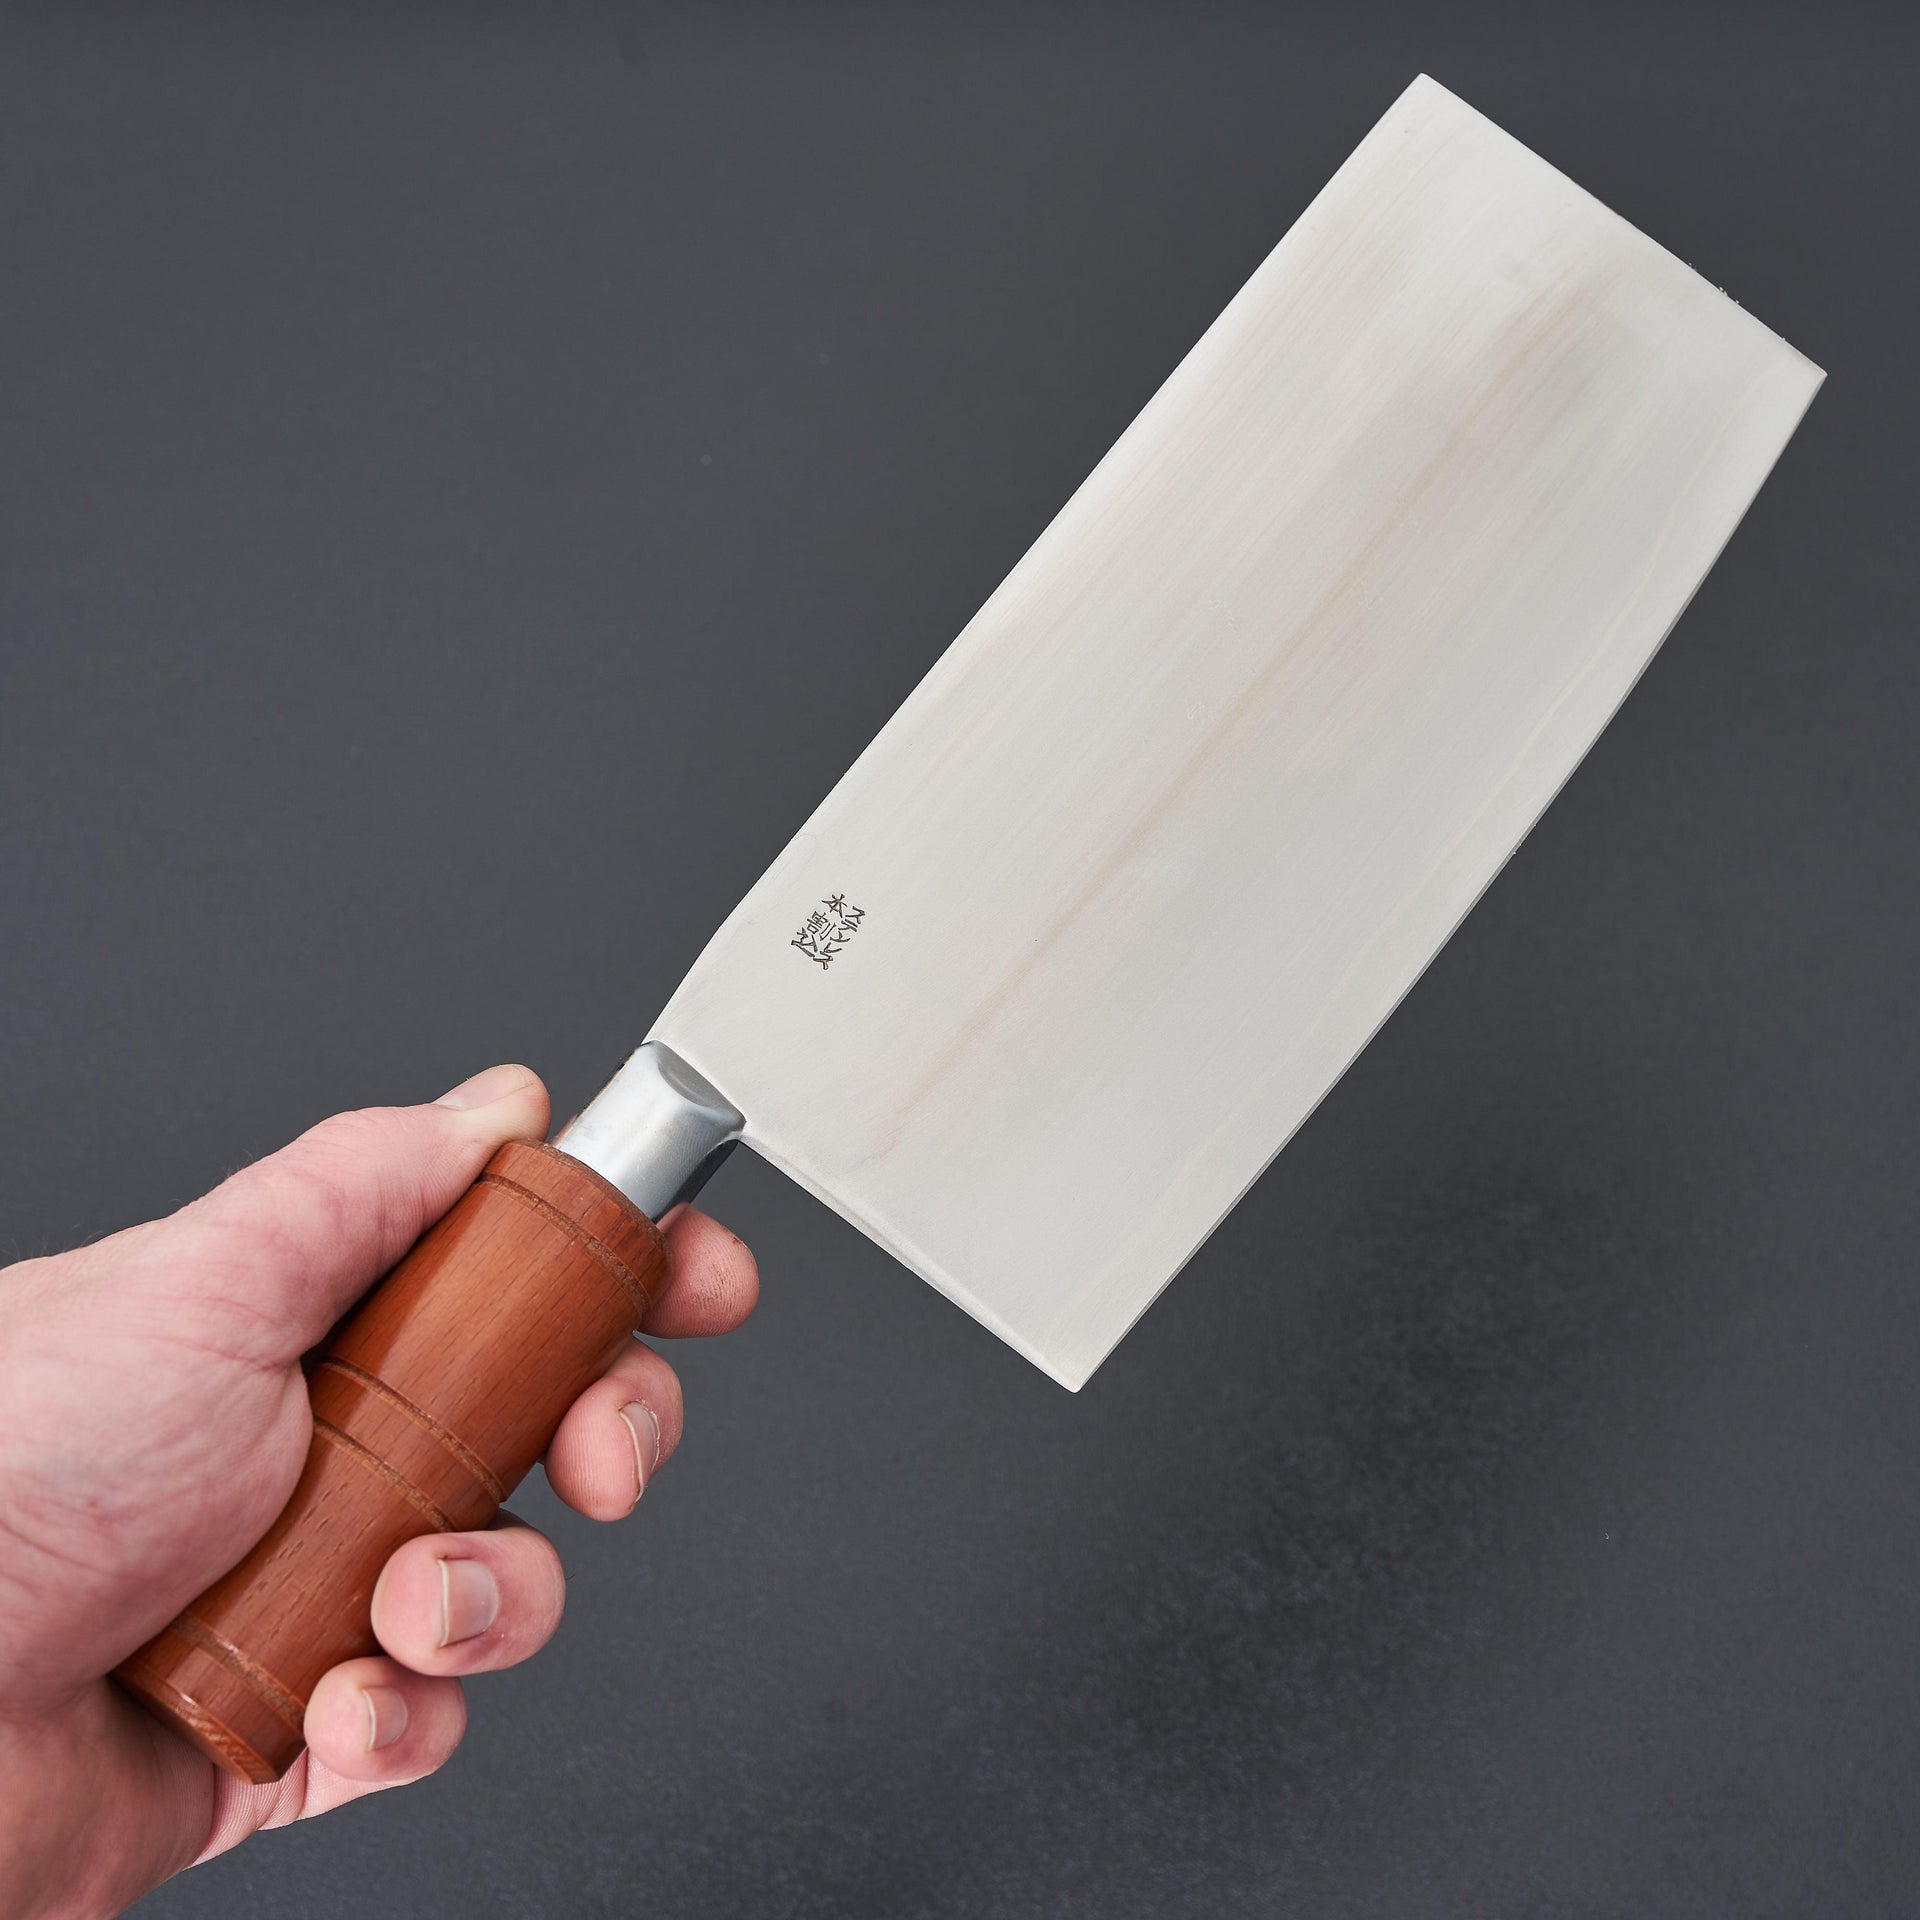 https://carbonknifeco.com/cdn/shop/files/Hitohira-Stainless-Clad-Chinese-Cleaver-200mm-Beechwood-Handle-Knife-Hitohira-chef-culinary-japanese-knife-knives-3.jpg?v=1704141079&width=1920